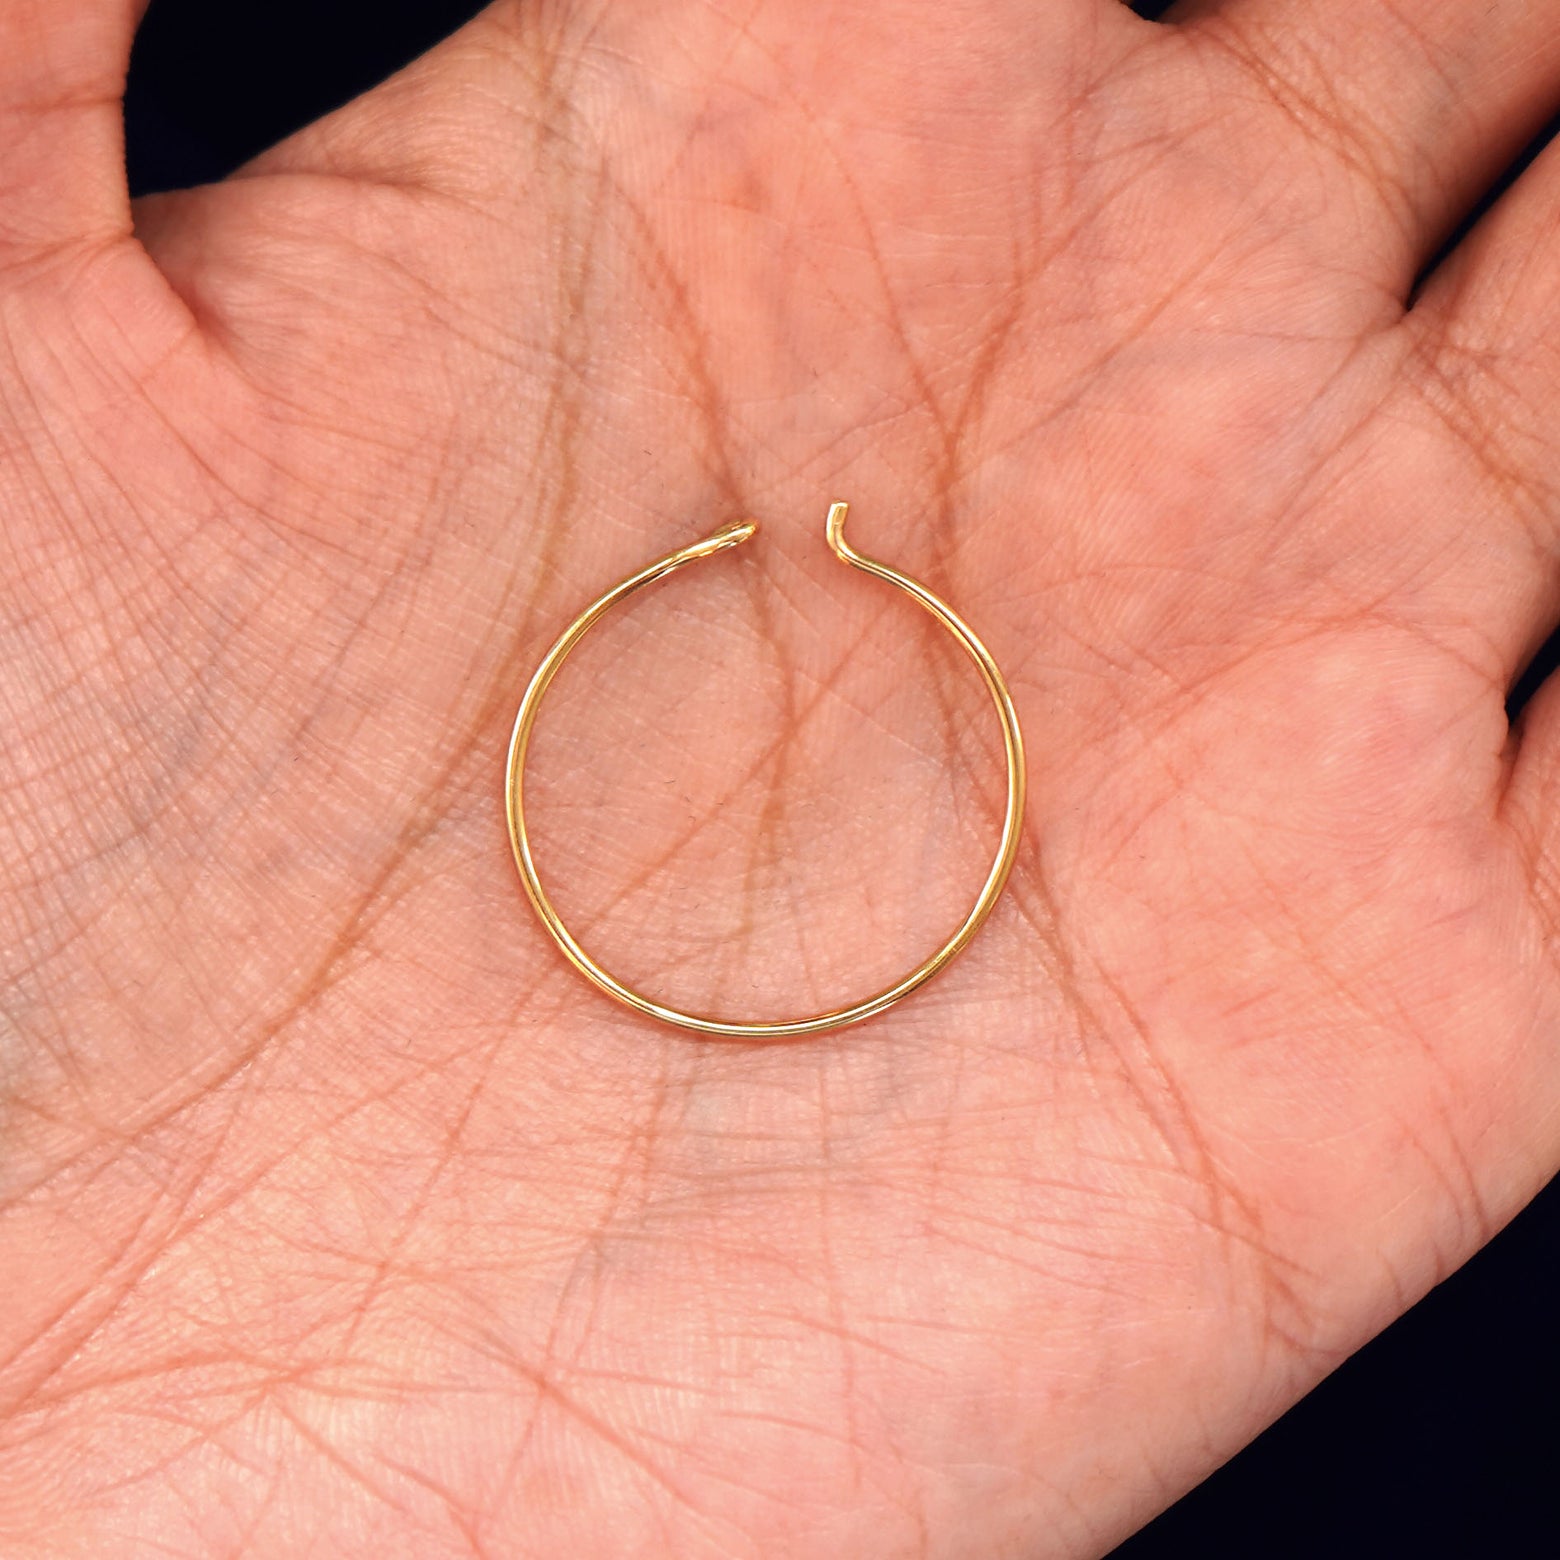 A solid 14k yellow gold Medium Hoop Earring open in a model's palm to show the easy hook closure